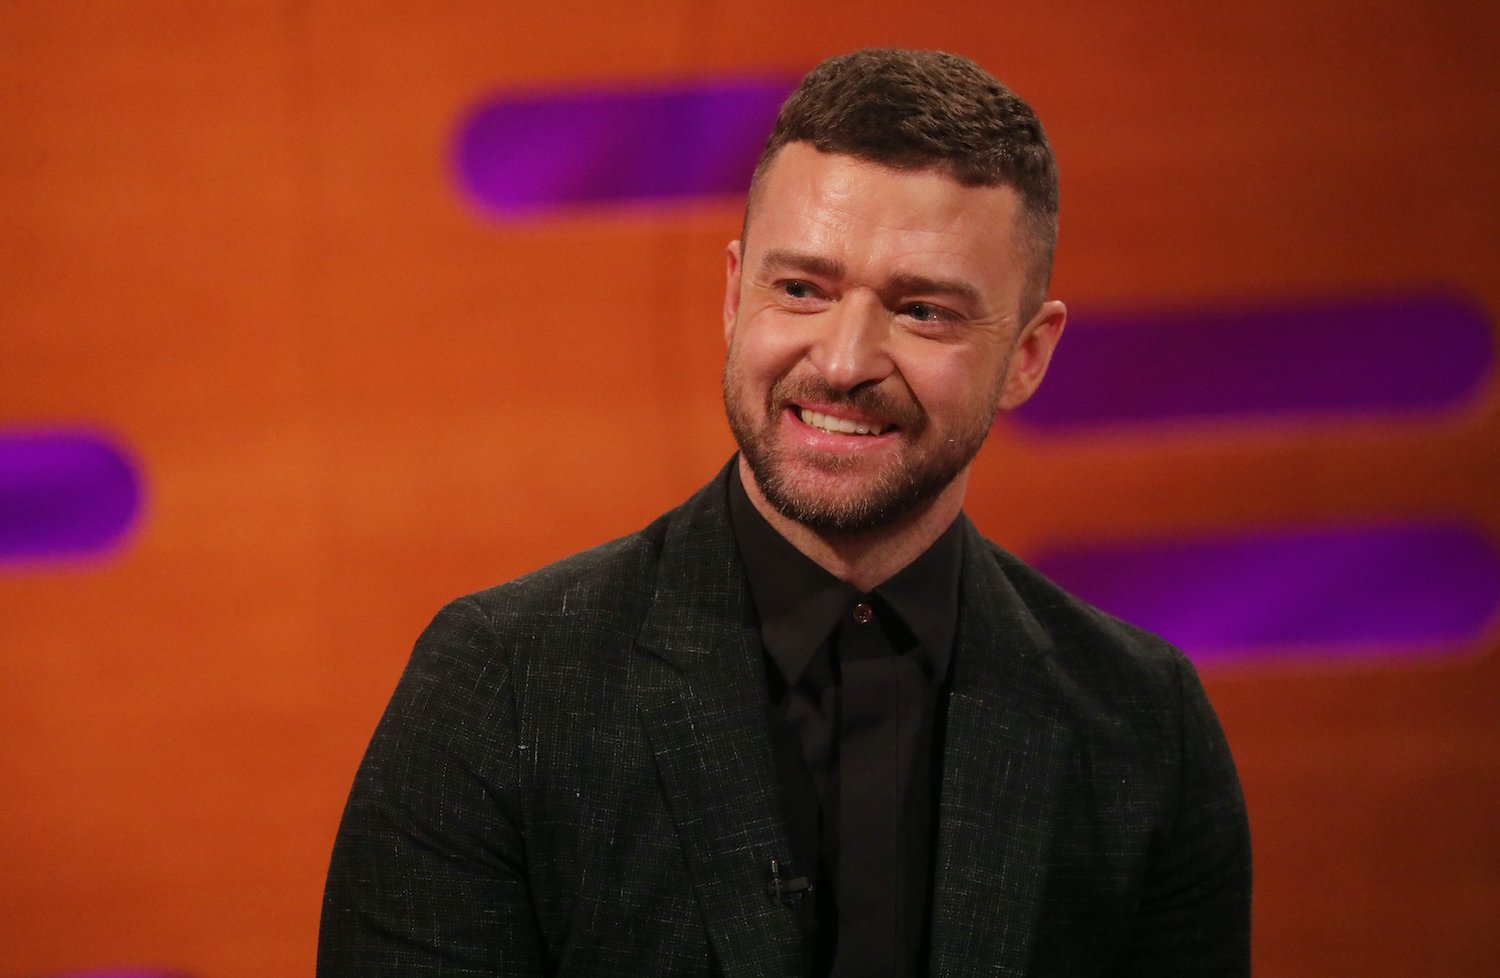 Palmer star Justin Timberlake during the filming for the Graham Norton Show